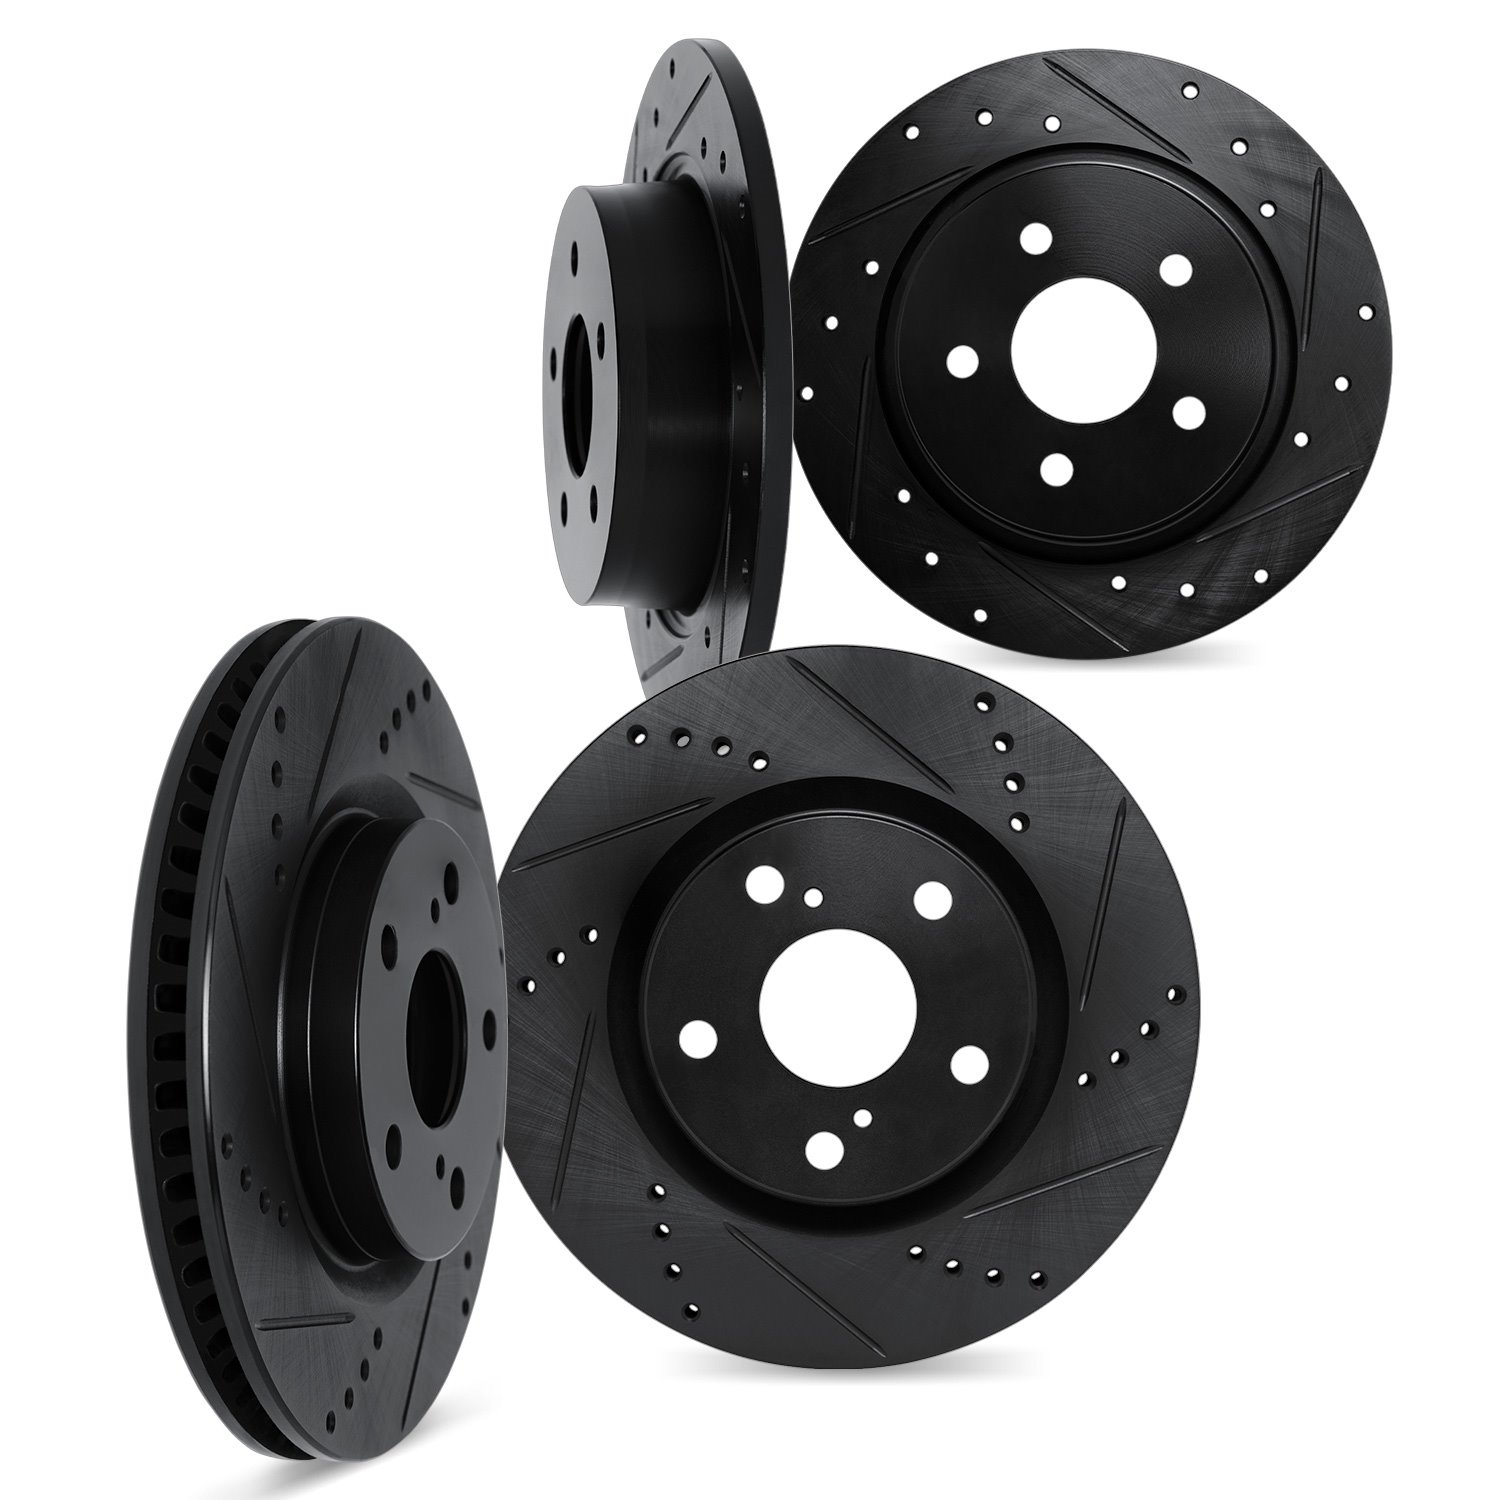 8004-42043 Drilled/Slotted Brake Rotors [Black], Fits Select Mopar, Position: Front and Rear